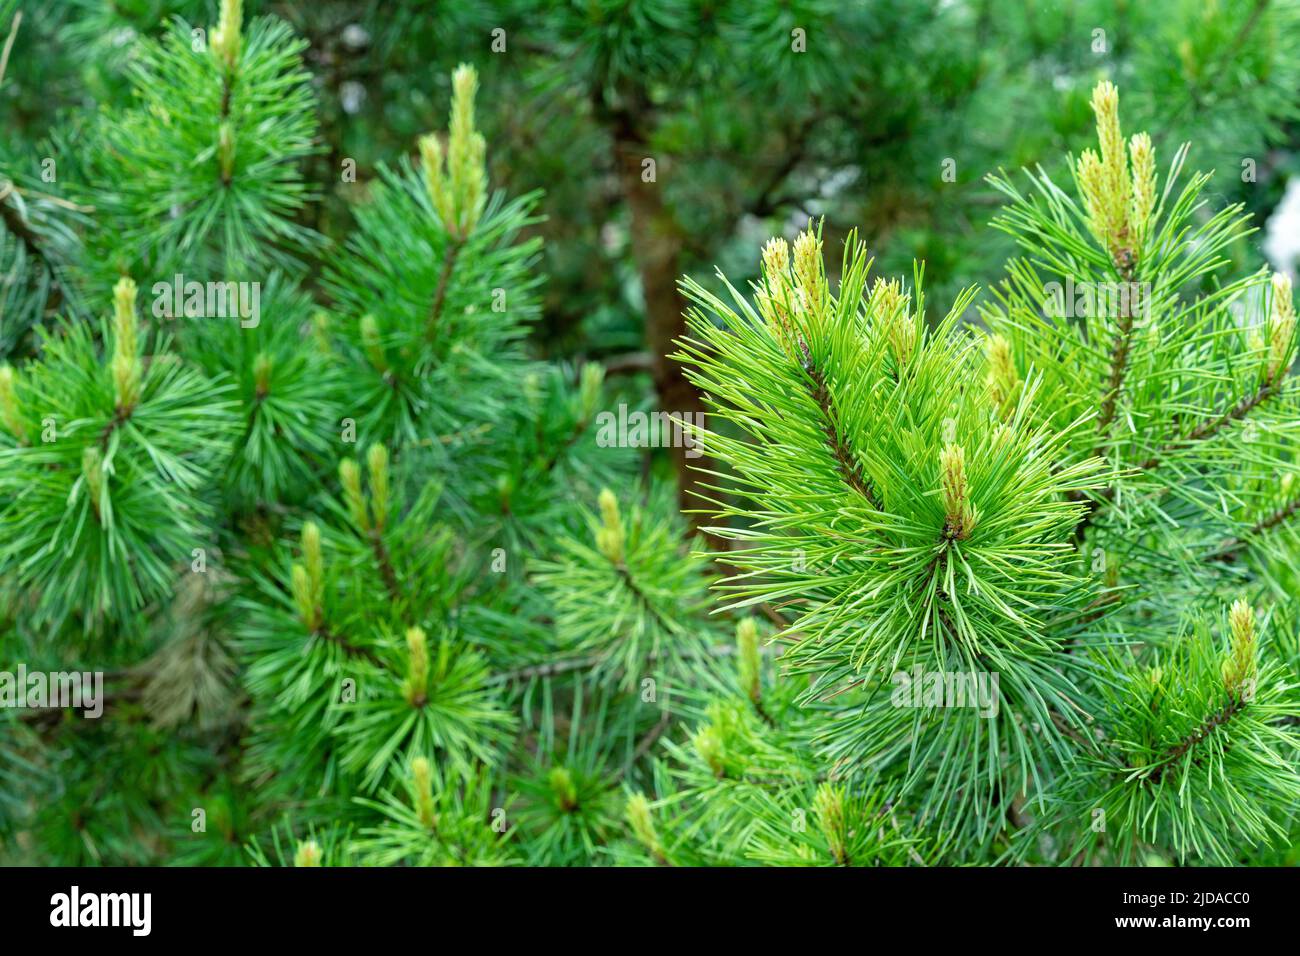 Bright green shoots and buds on a pine tree. Spruce branch with fresh sprouts. Evergreen foliage pine tree. Stock Photo